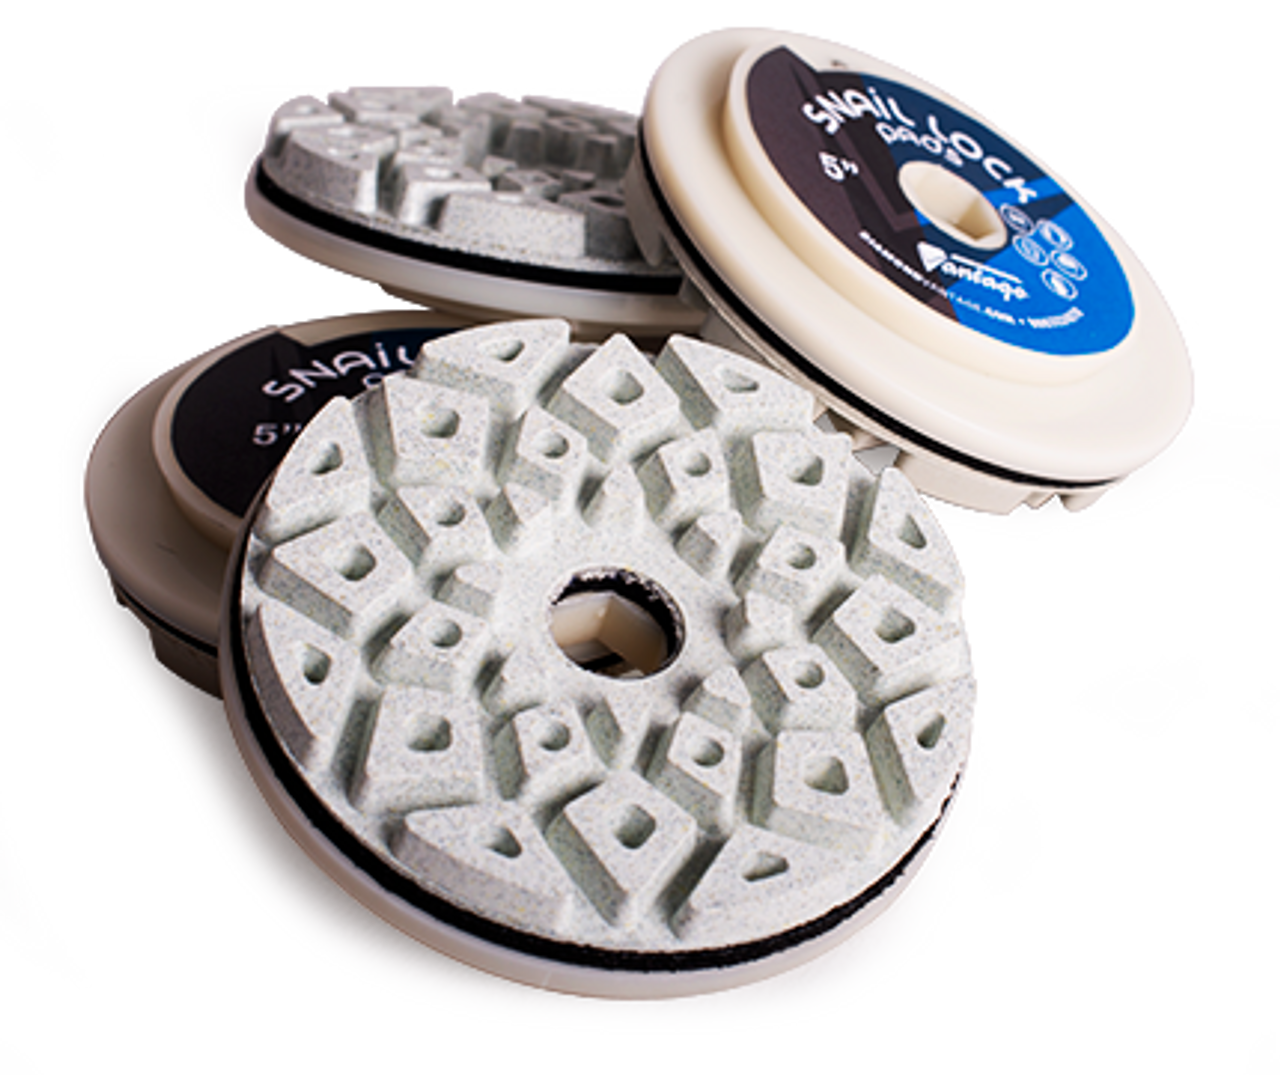 Diamond Vantage 5? x Snail Lock In-Line Polishing Pad for Natural and Engineered Stone, 400 Grit